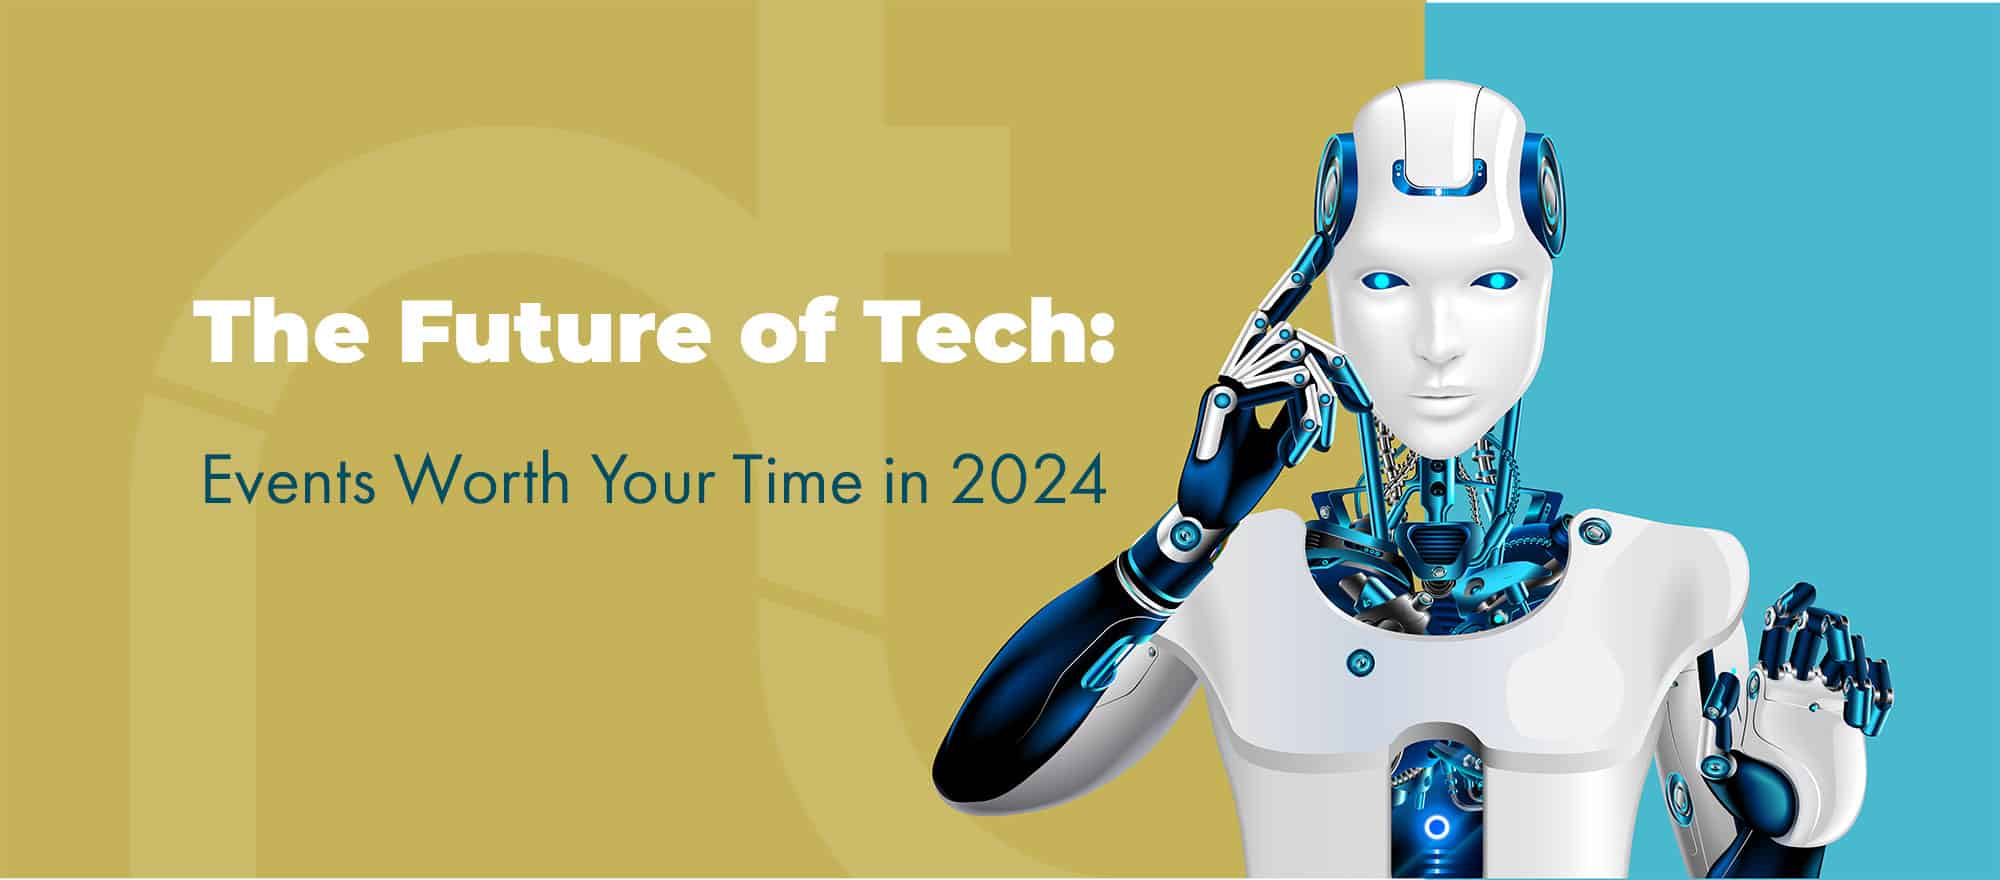 The Future of Tech: Events Worth Your Time in 2024